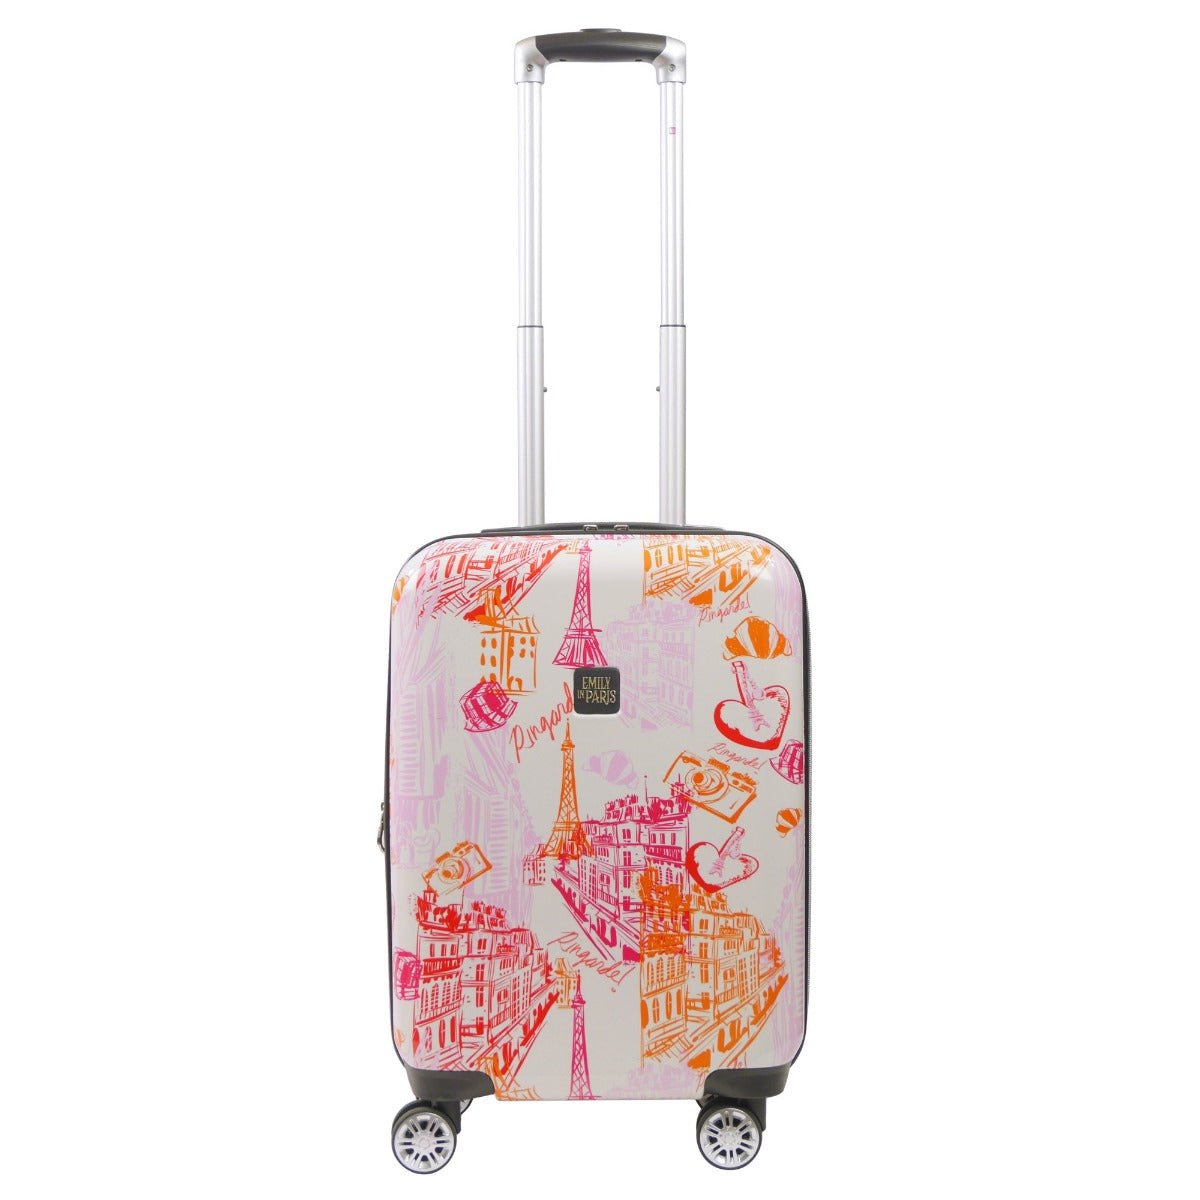 Ful Emily in Paris 21.5" hardside expandable luggage - best wheeled carry on suitcase for traveling